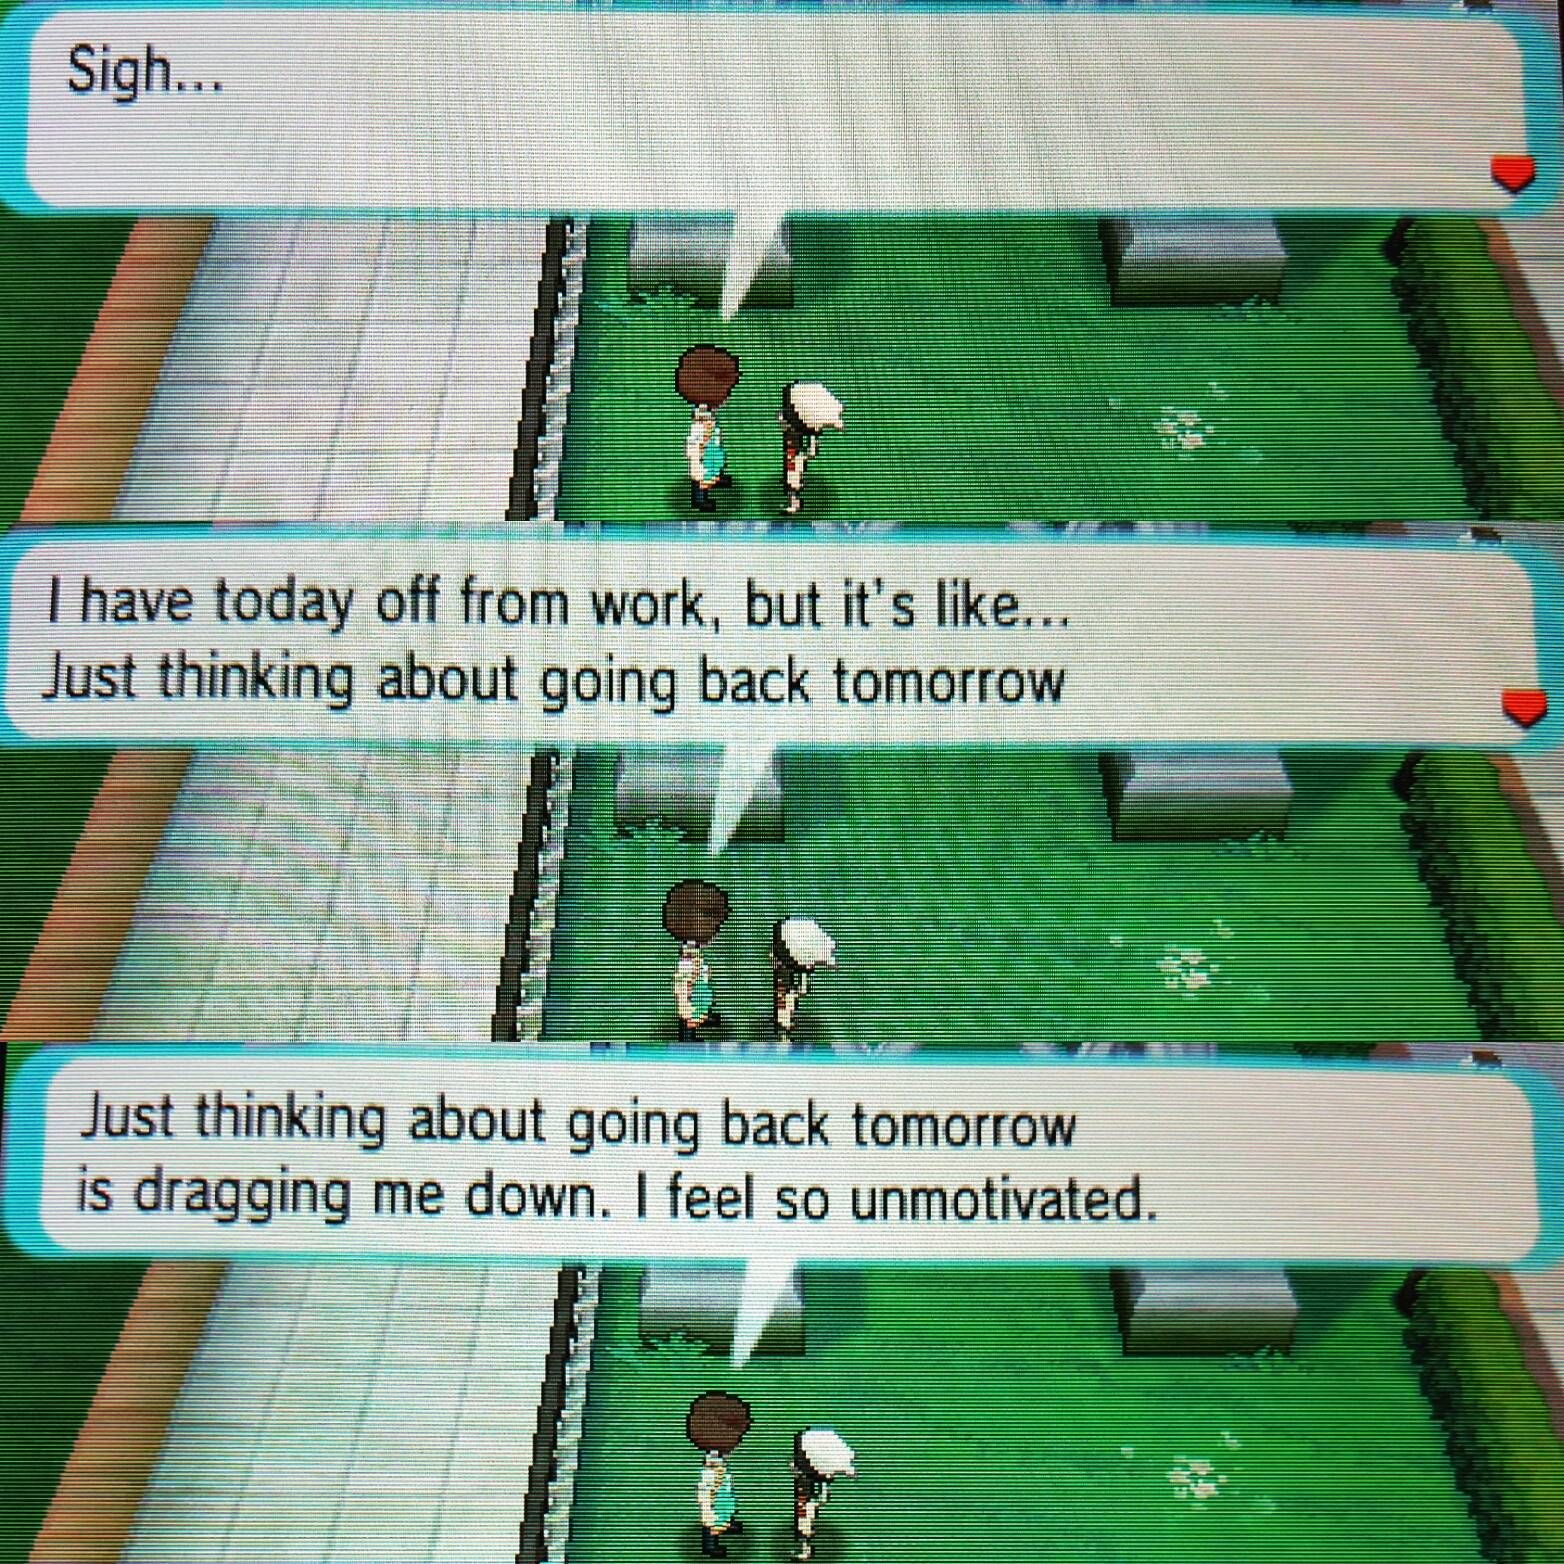 Playing Alpha Sapphire when it got too real